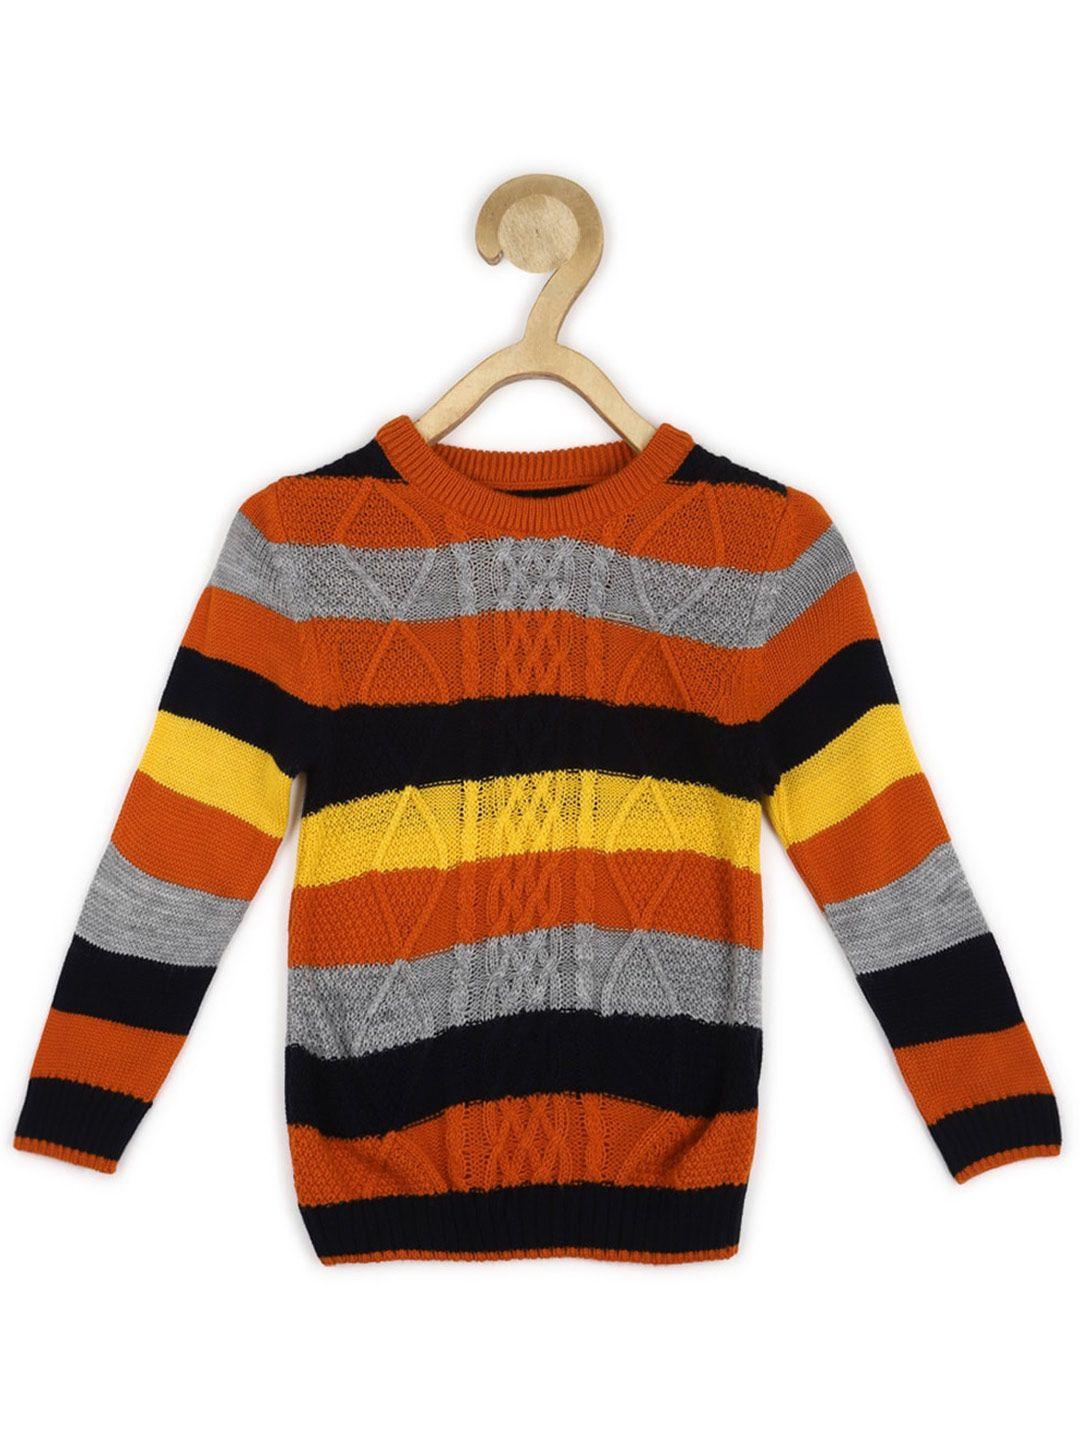 allen solly junior boys striped round neck long sleeve acrylic pullover sweater